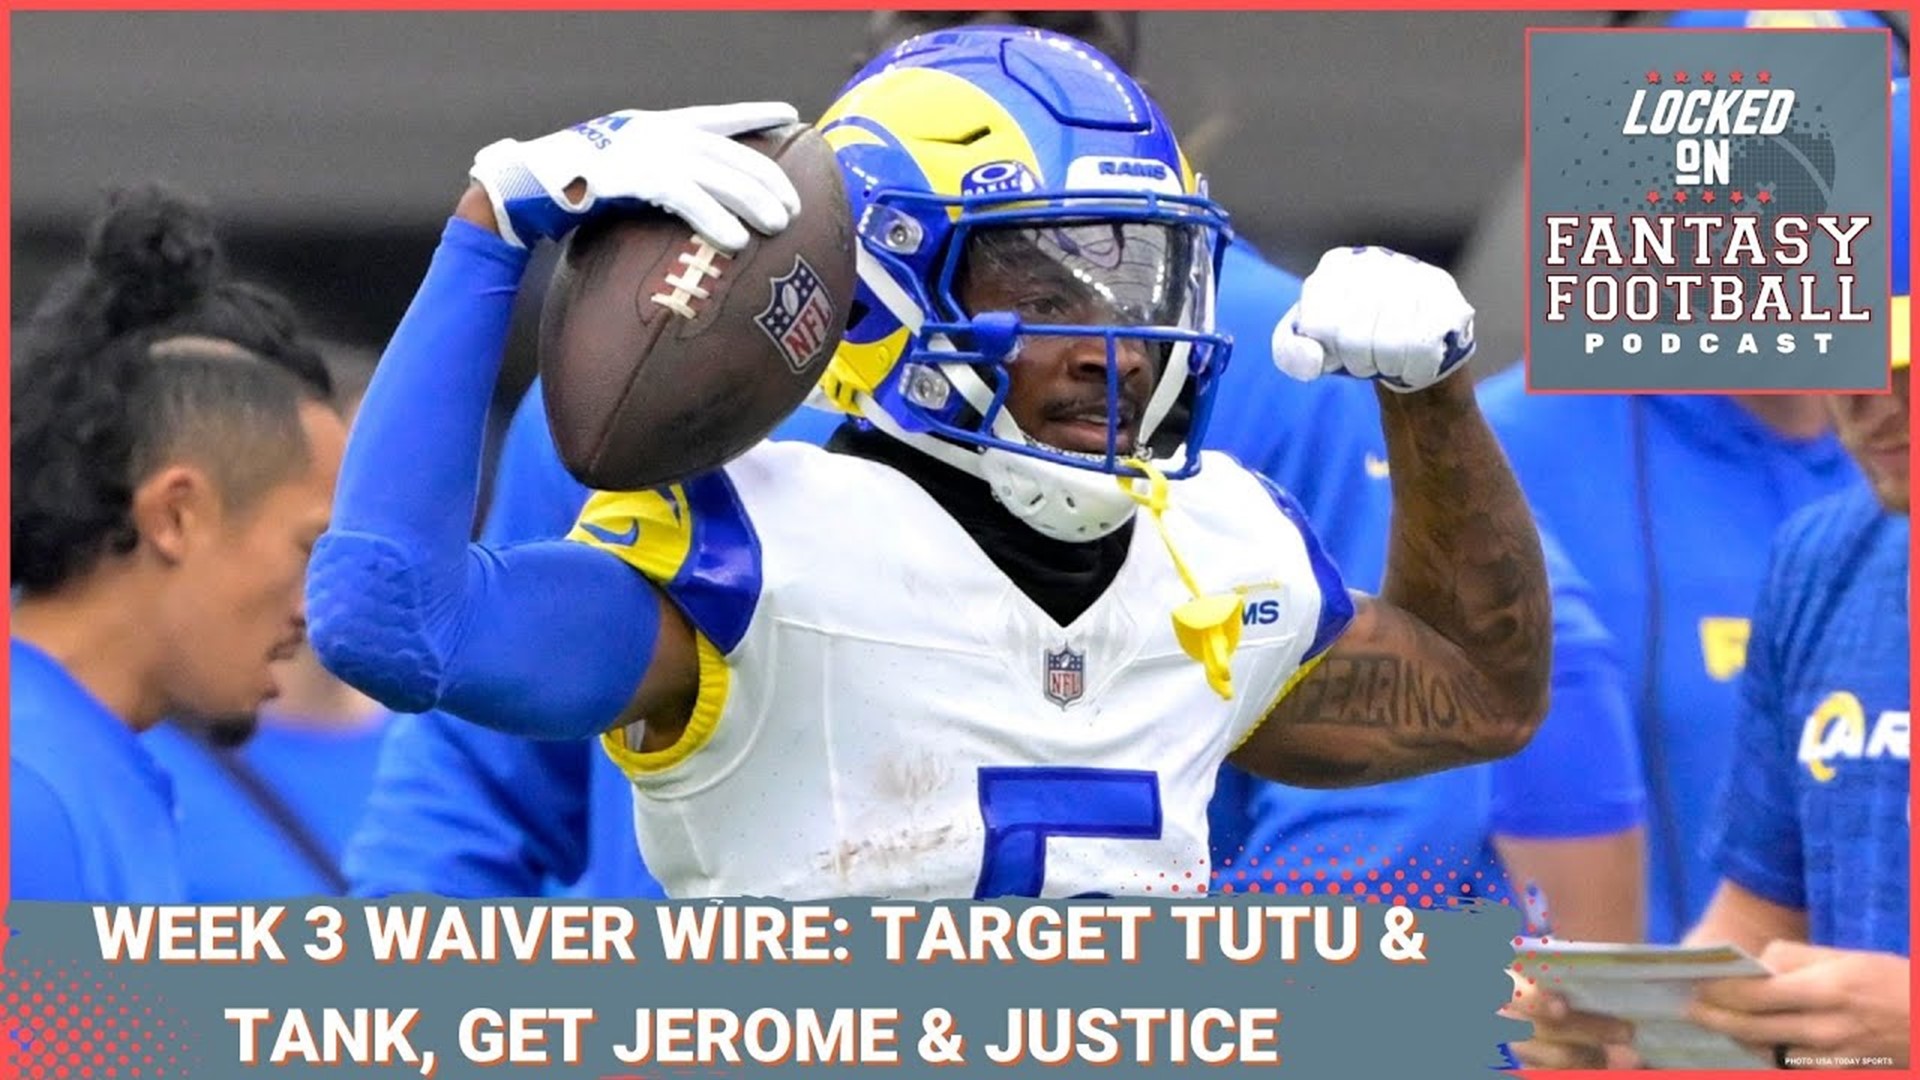 Sporting News' Vinnie Iyer and NFL Media's Michelle Magdziuk breakdown the best targets for the Week 3 waiver wire, led by wide receivers Tank Dell & Tutu Atwell.